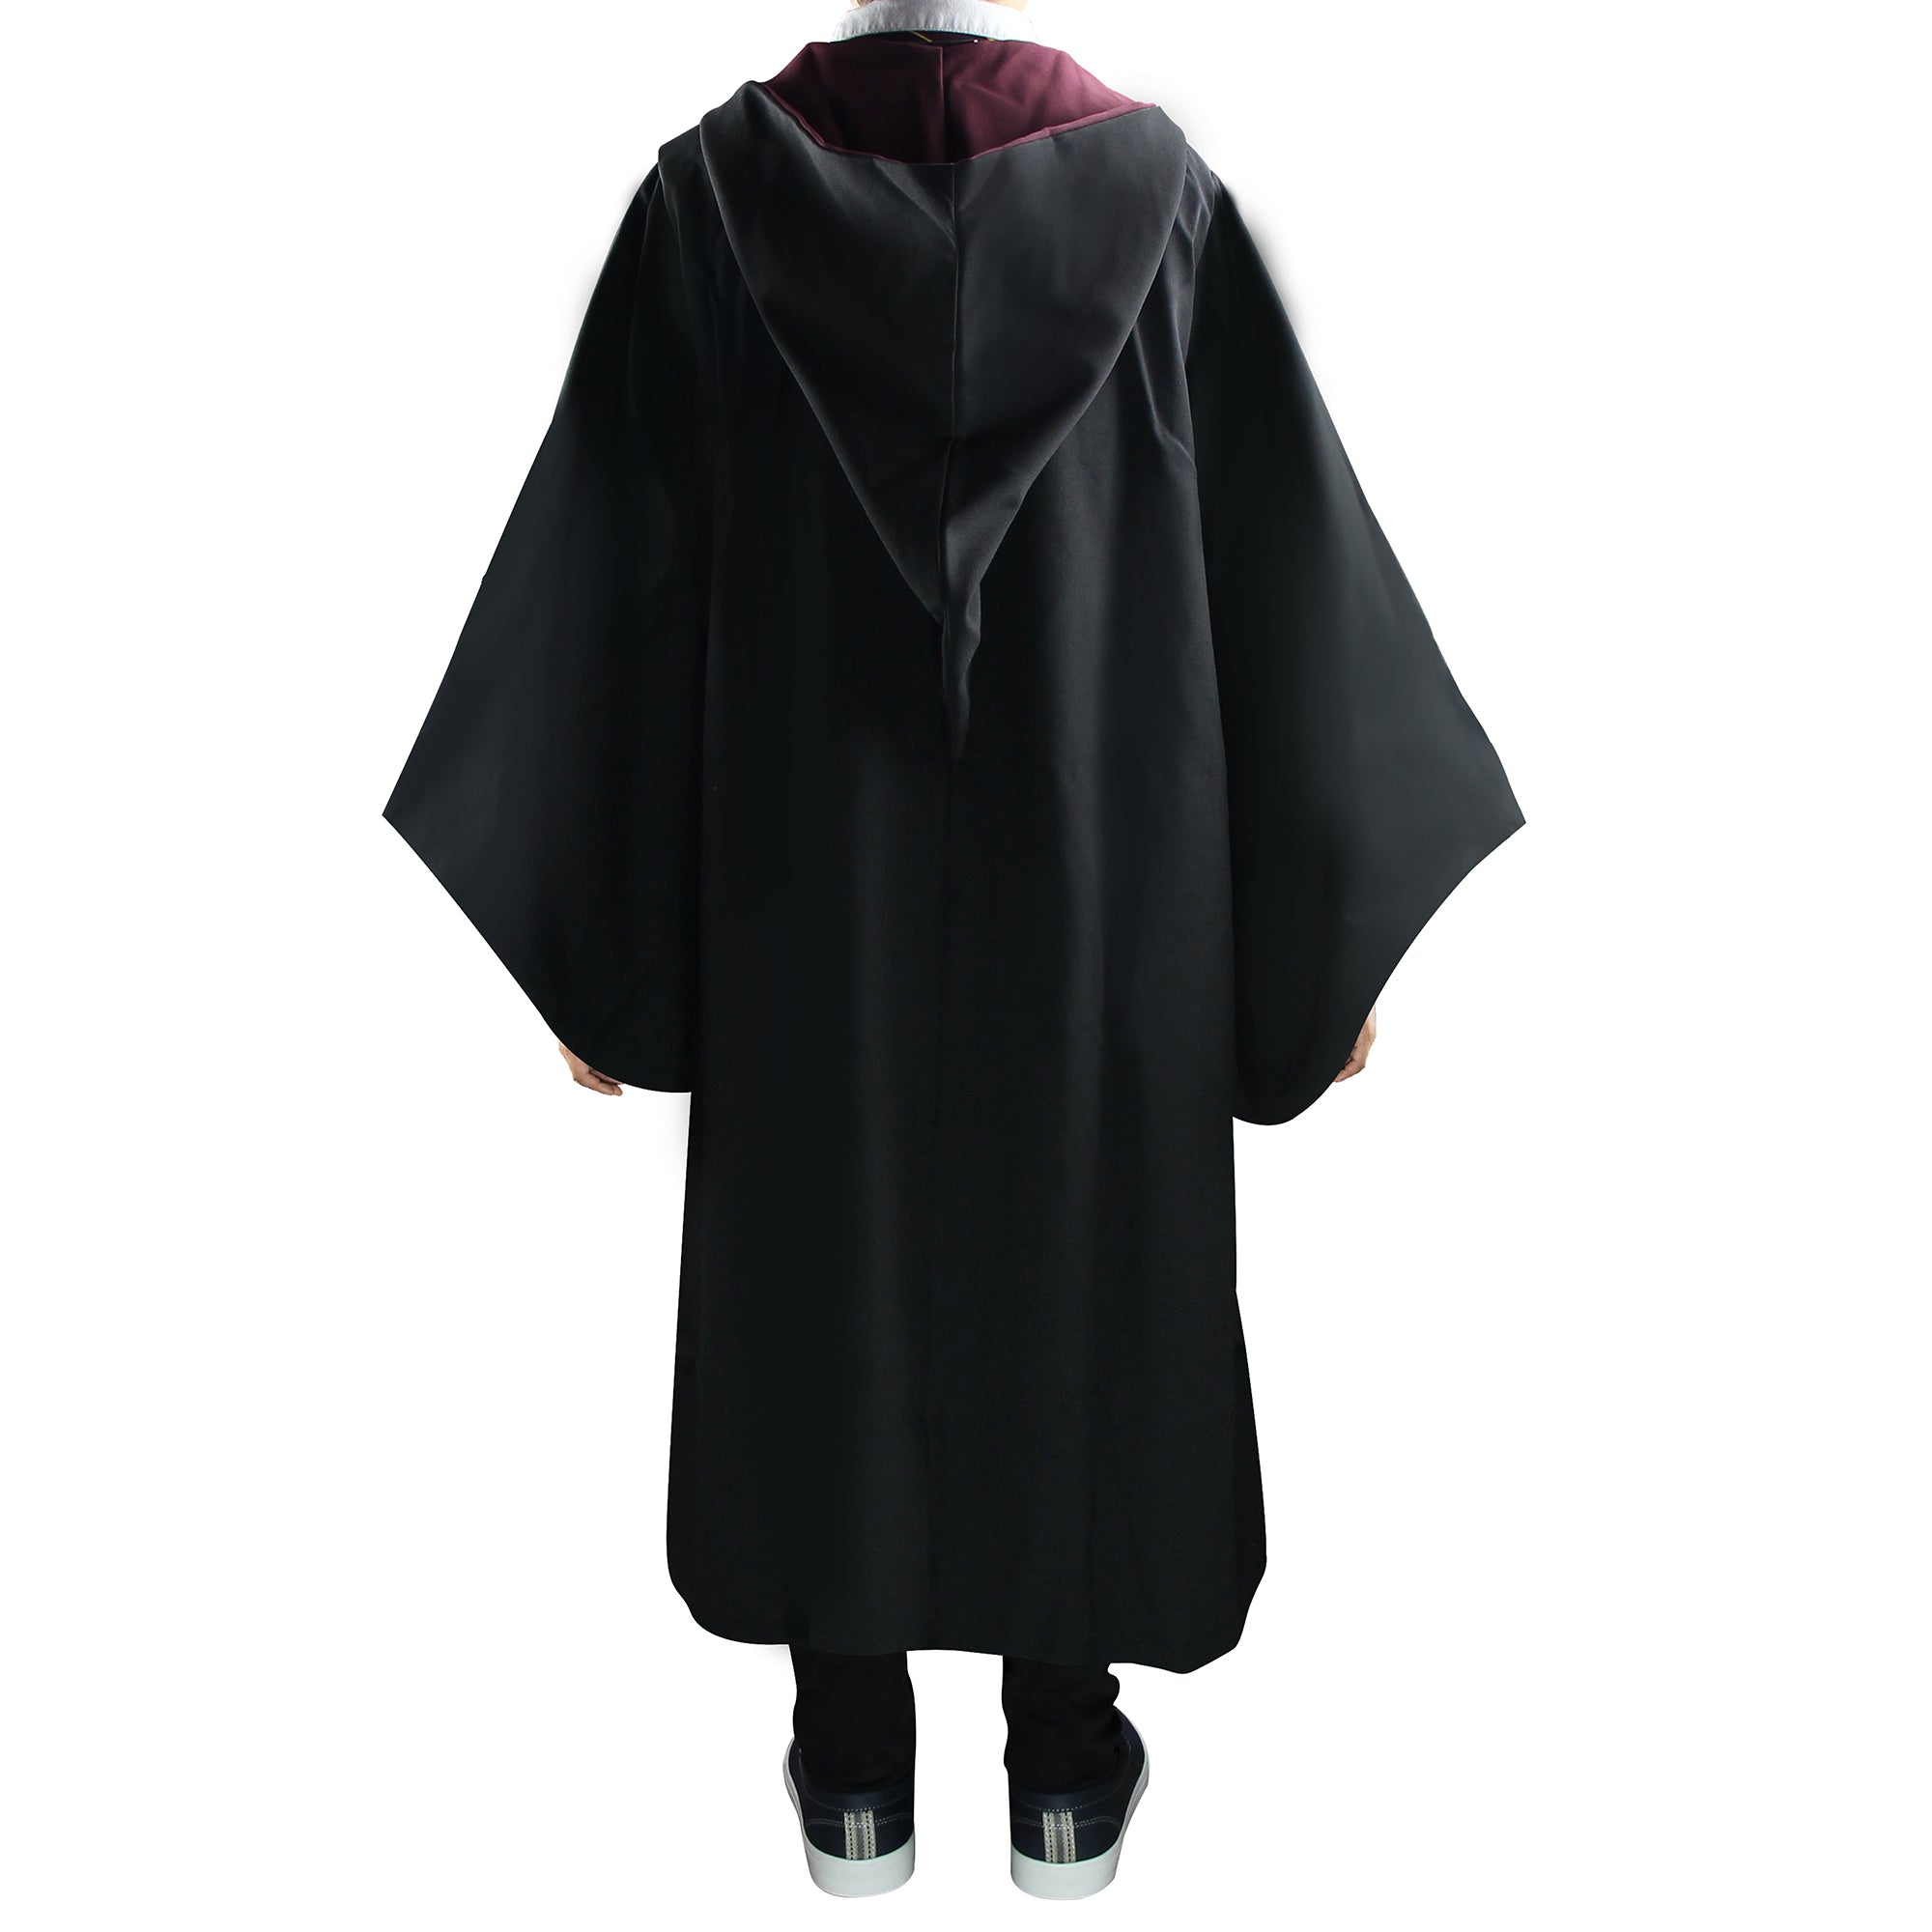  Harry Potter Gryffindor Robe, Official Wizarding World Costume  Robes, Classic Kids Size Dress Up Accessory, Child Size Small (4-6) :  Clothing, Shoes & Jewelry